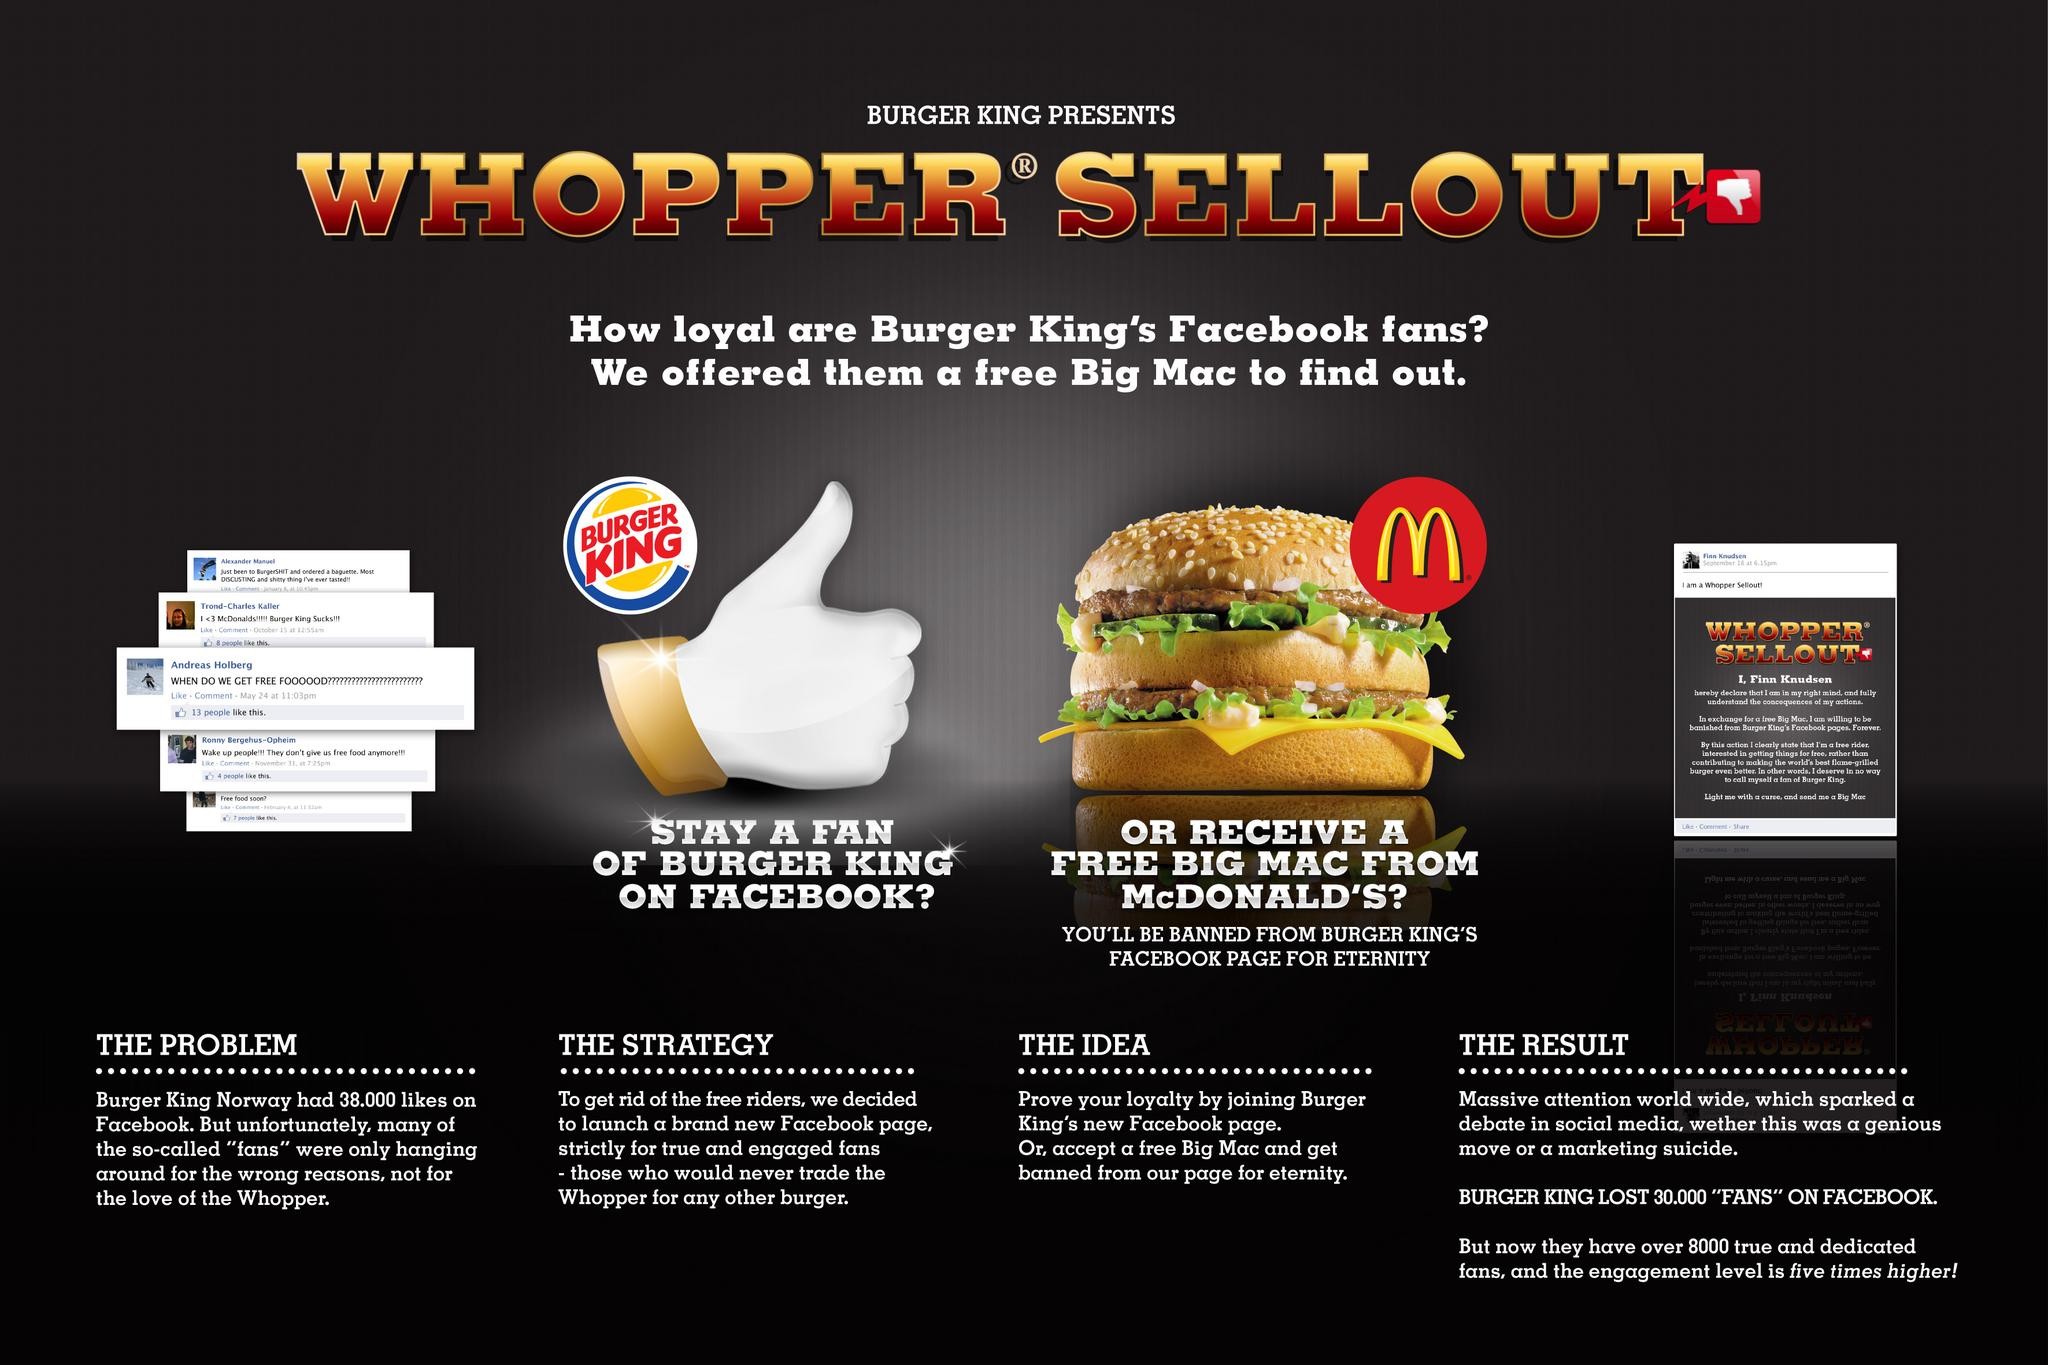 WHOPPER SELLOUT